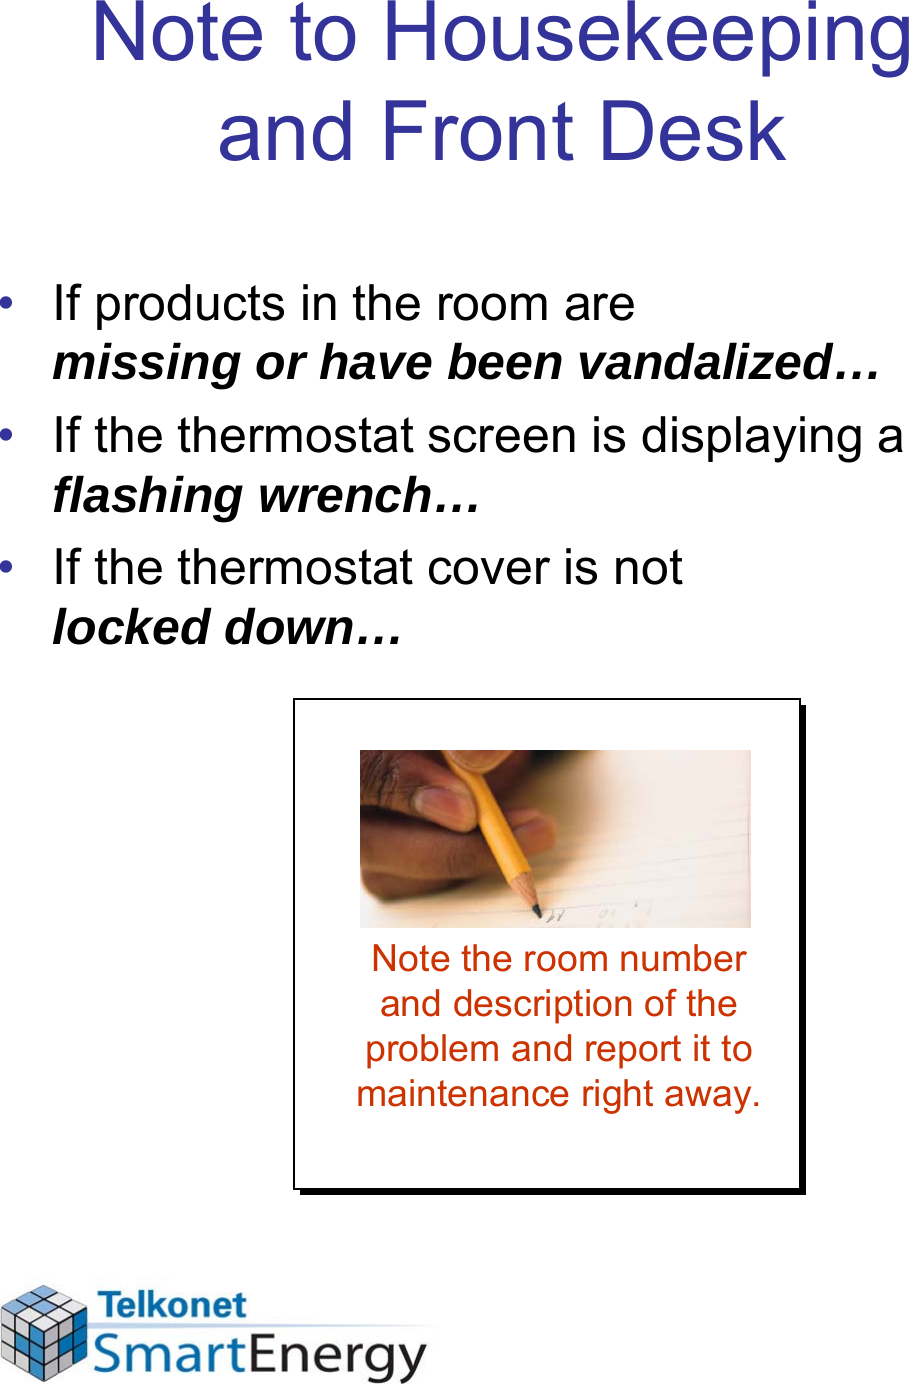 Note to Housekeeping and Front Desk• If products in the room are missing or have been vandalized…• If the thermostat screen is displaying a  flashing wrench…• If the thermostat cover is not locked down…Note the room number and description of the problem and report it to maintenance right away.